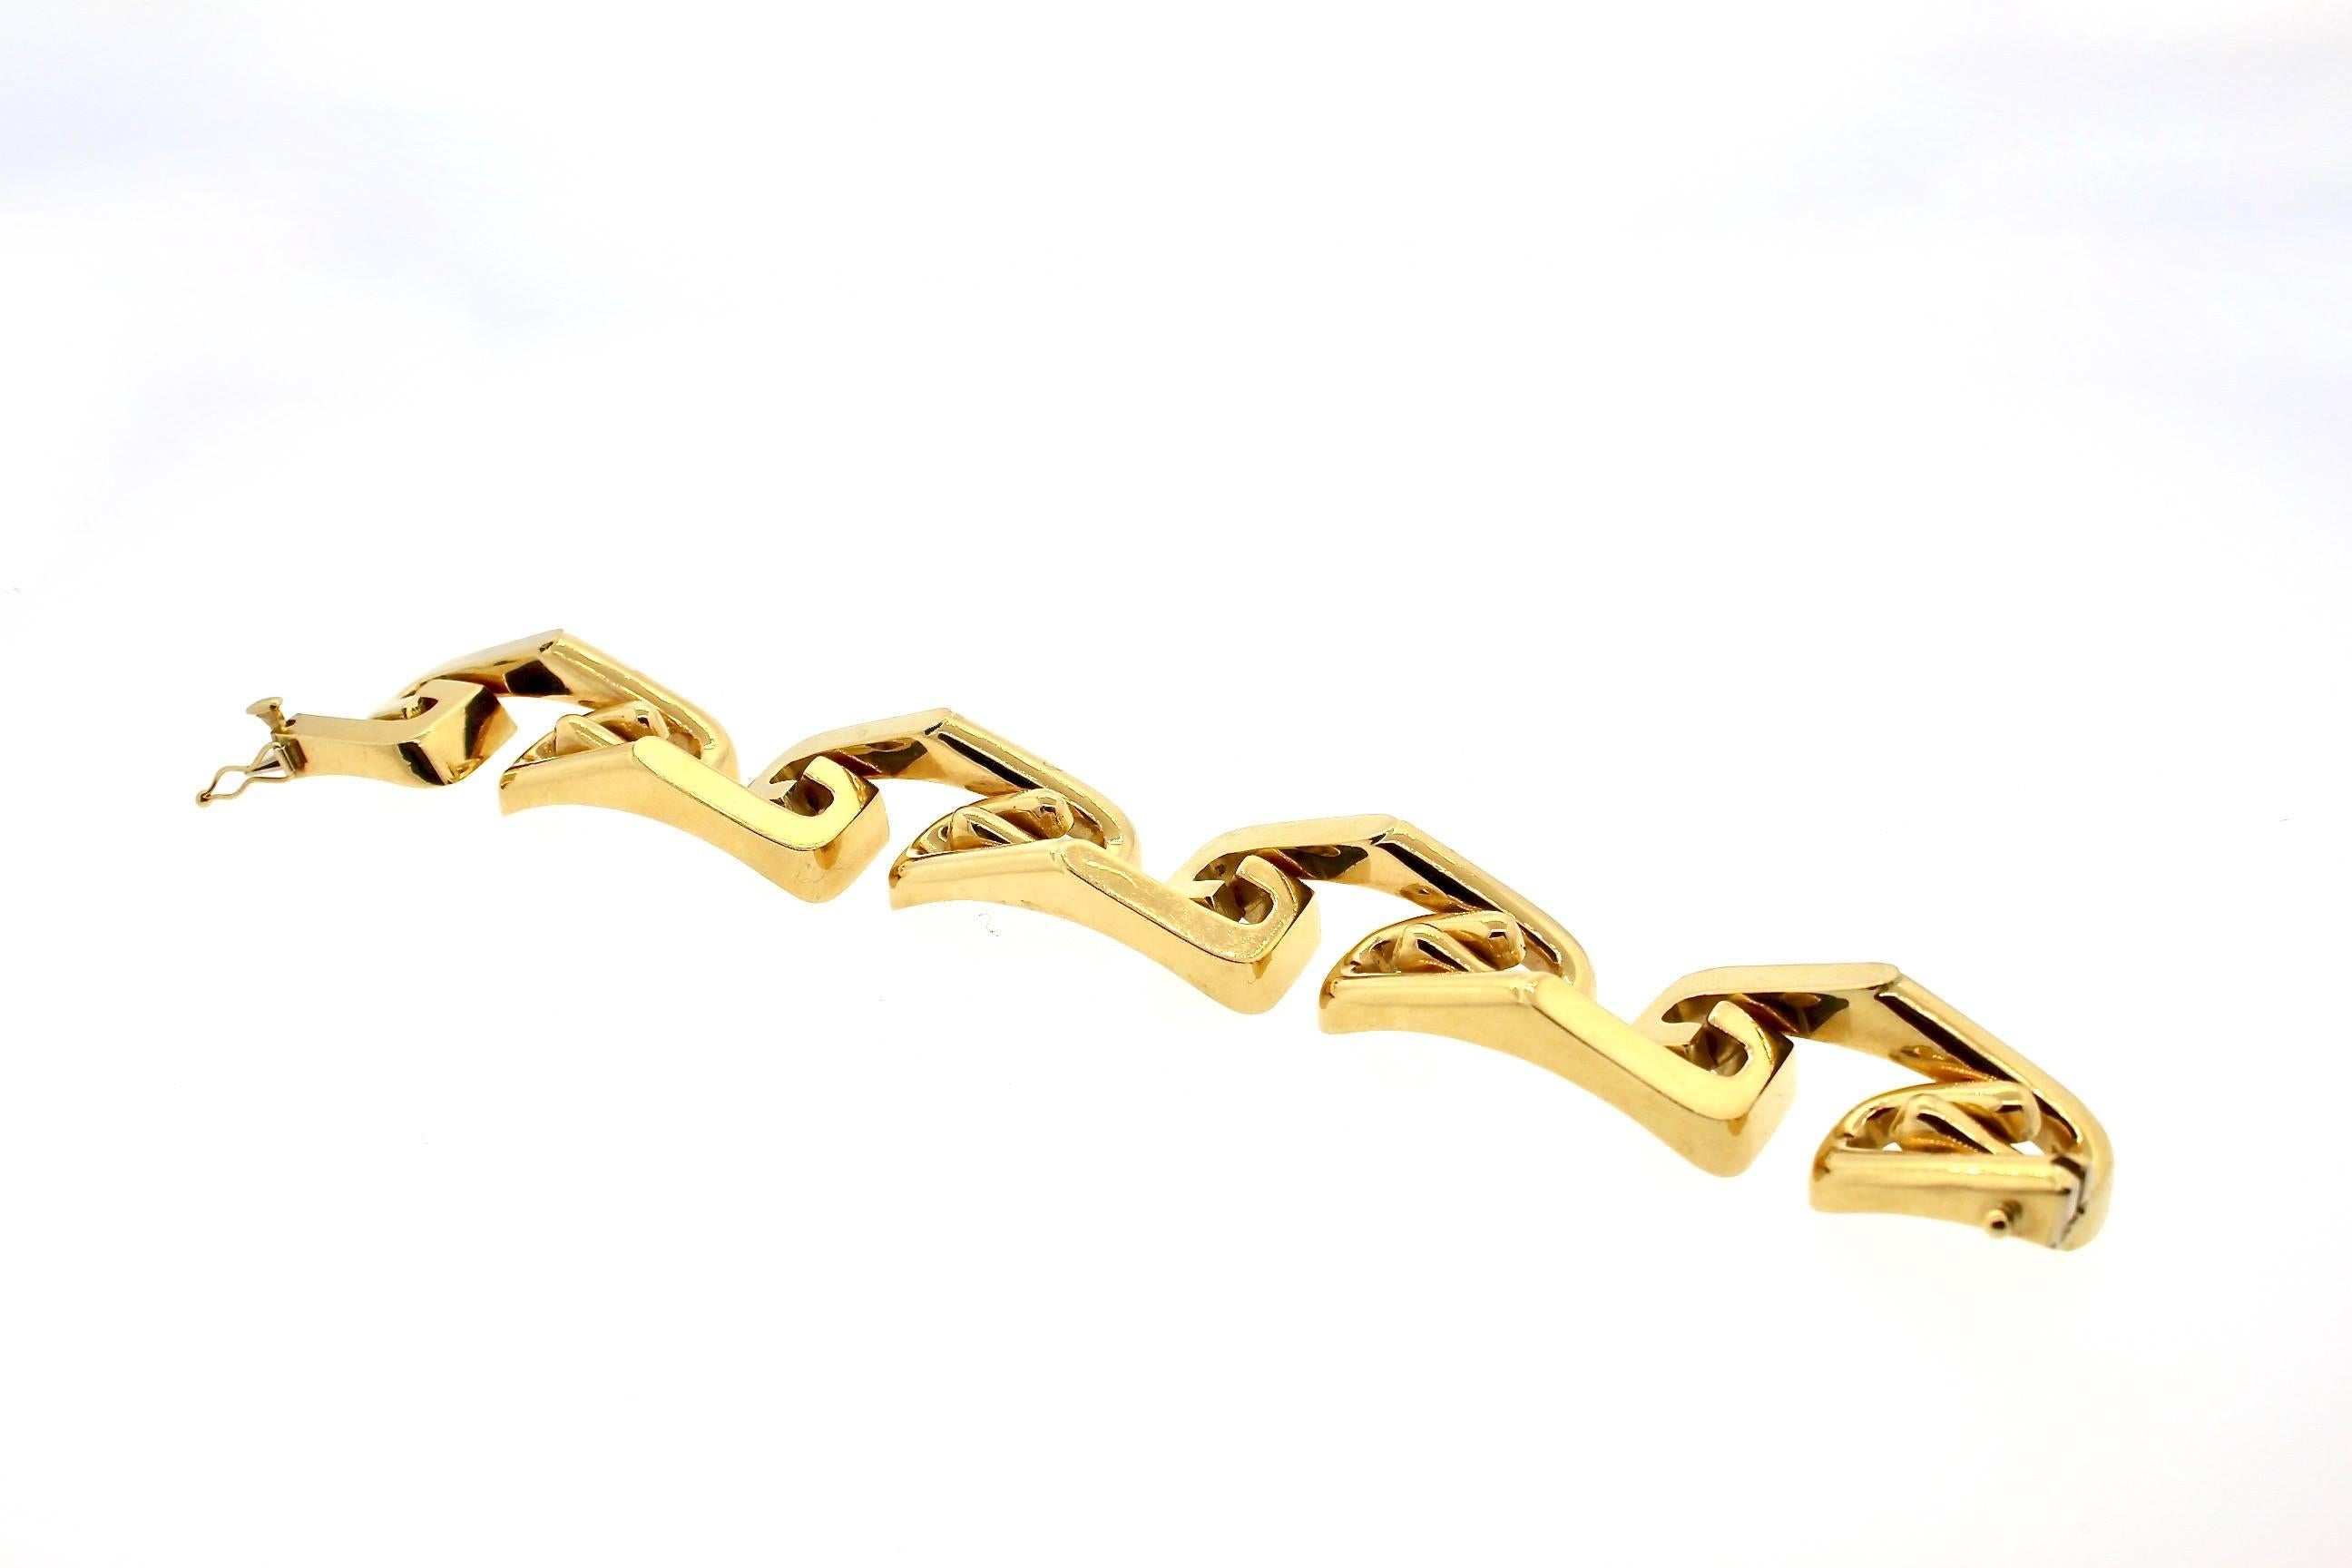 A cool example of a hollow gold 14k bracelet circa 1970.  This wide bracelet is about 3/4 inch wide, and creates a modern dimensional S curve link around the wrist.  It is a nice weight, with a tongue clasp and a safety.  It is curved to fit around